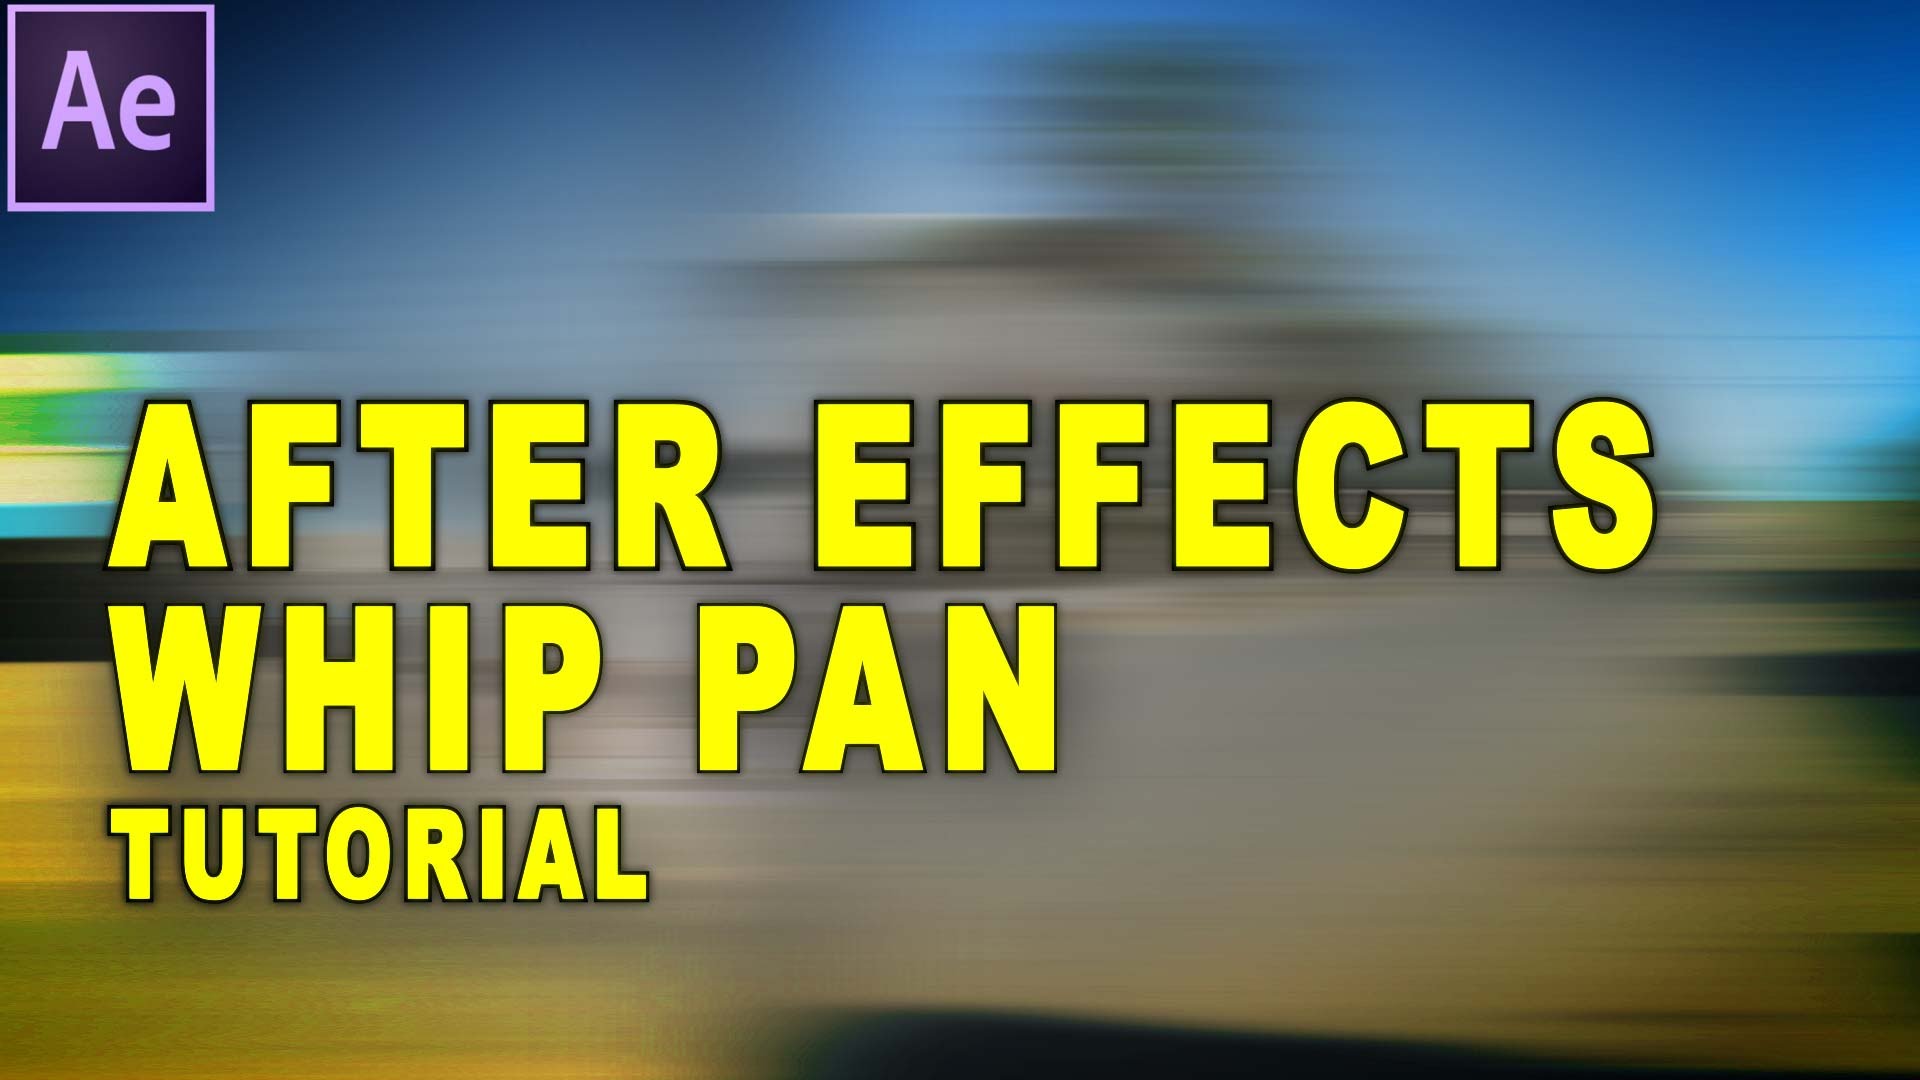 How to Make a "Whip Pan" Transition in After Effects